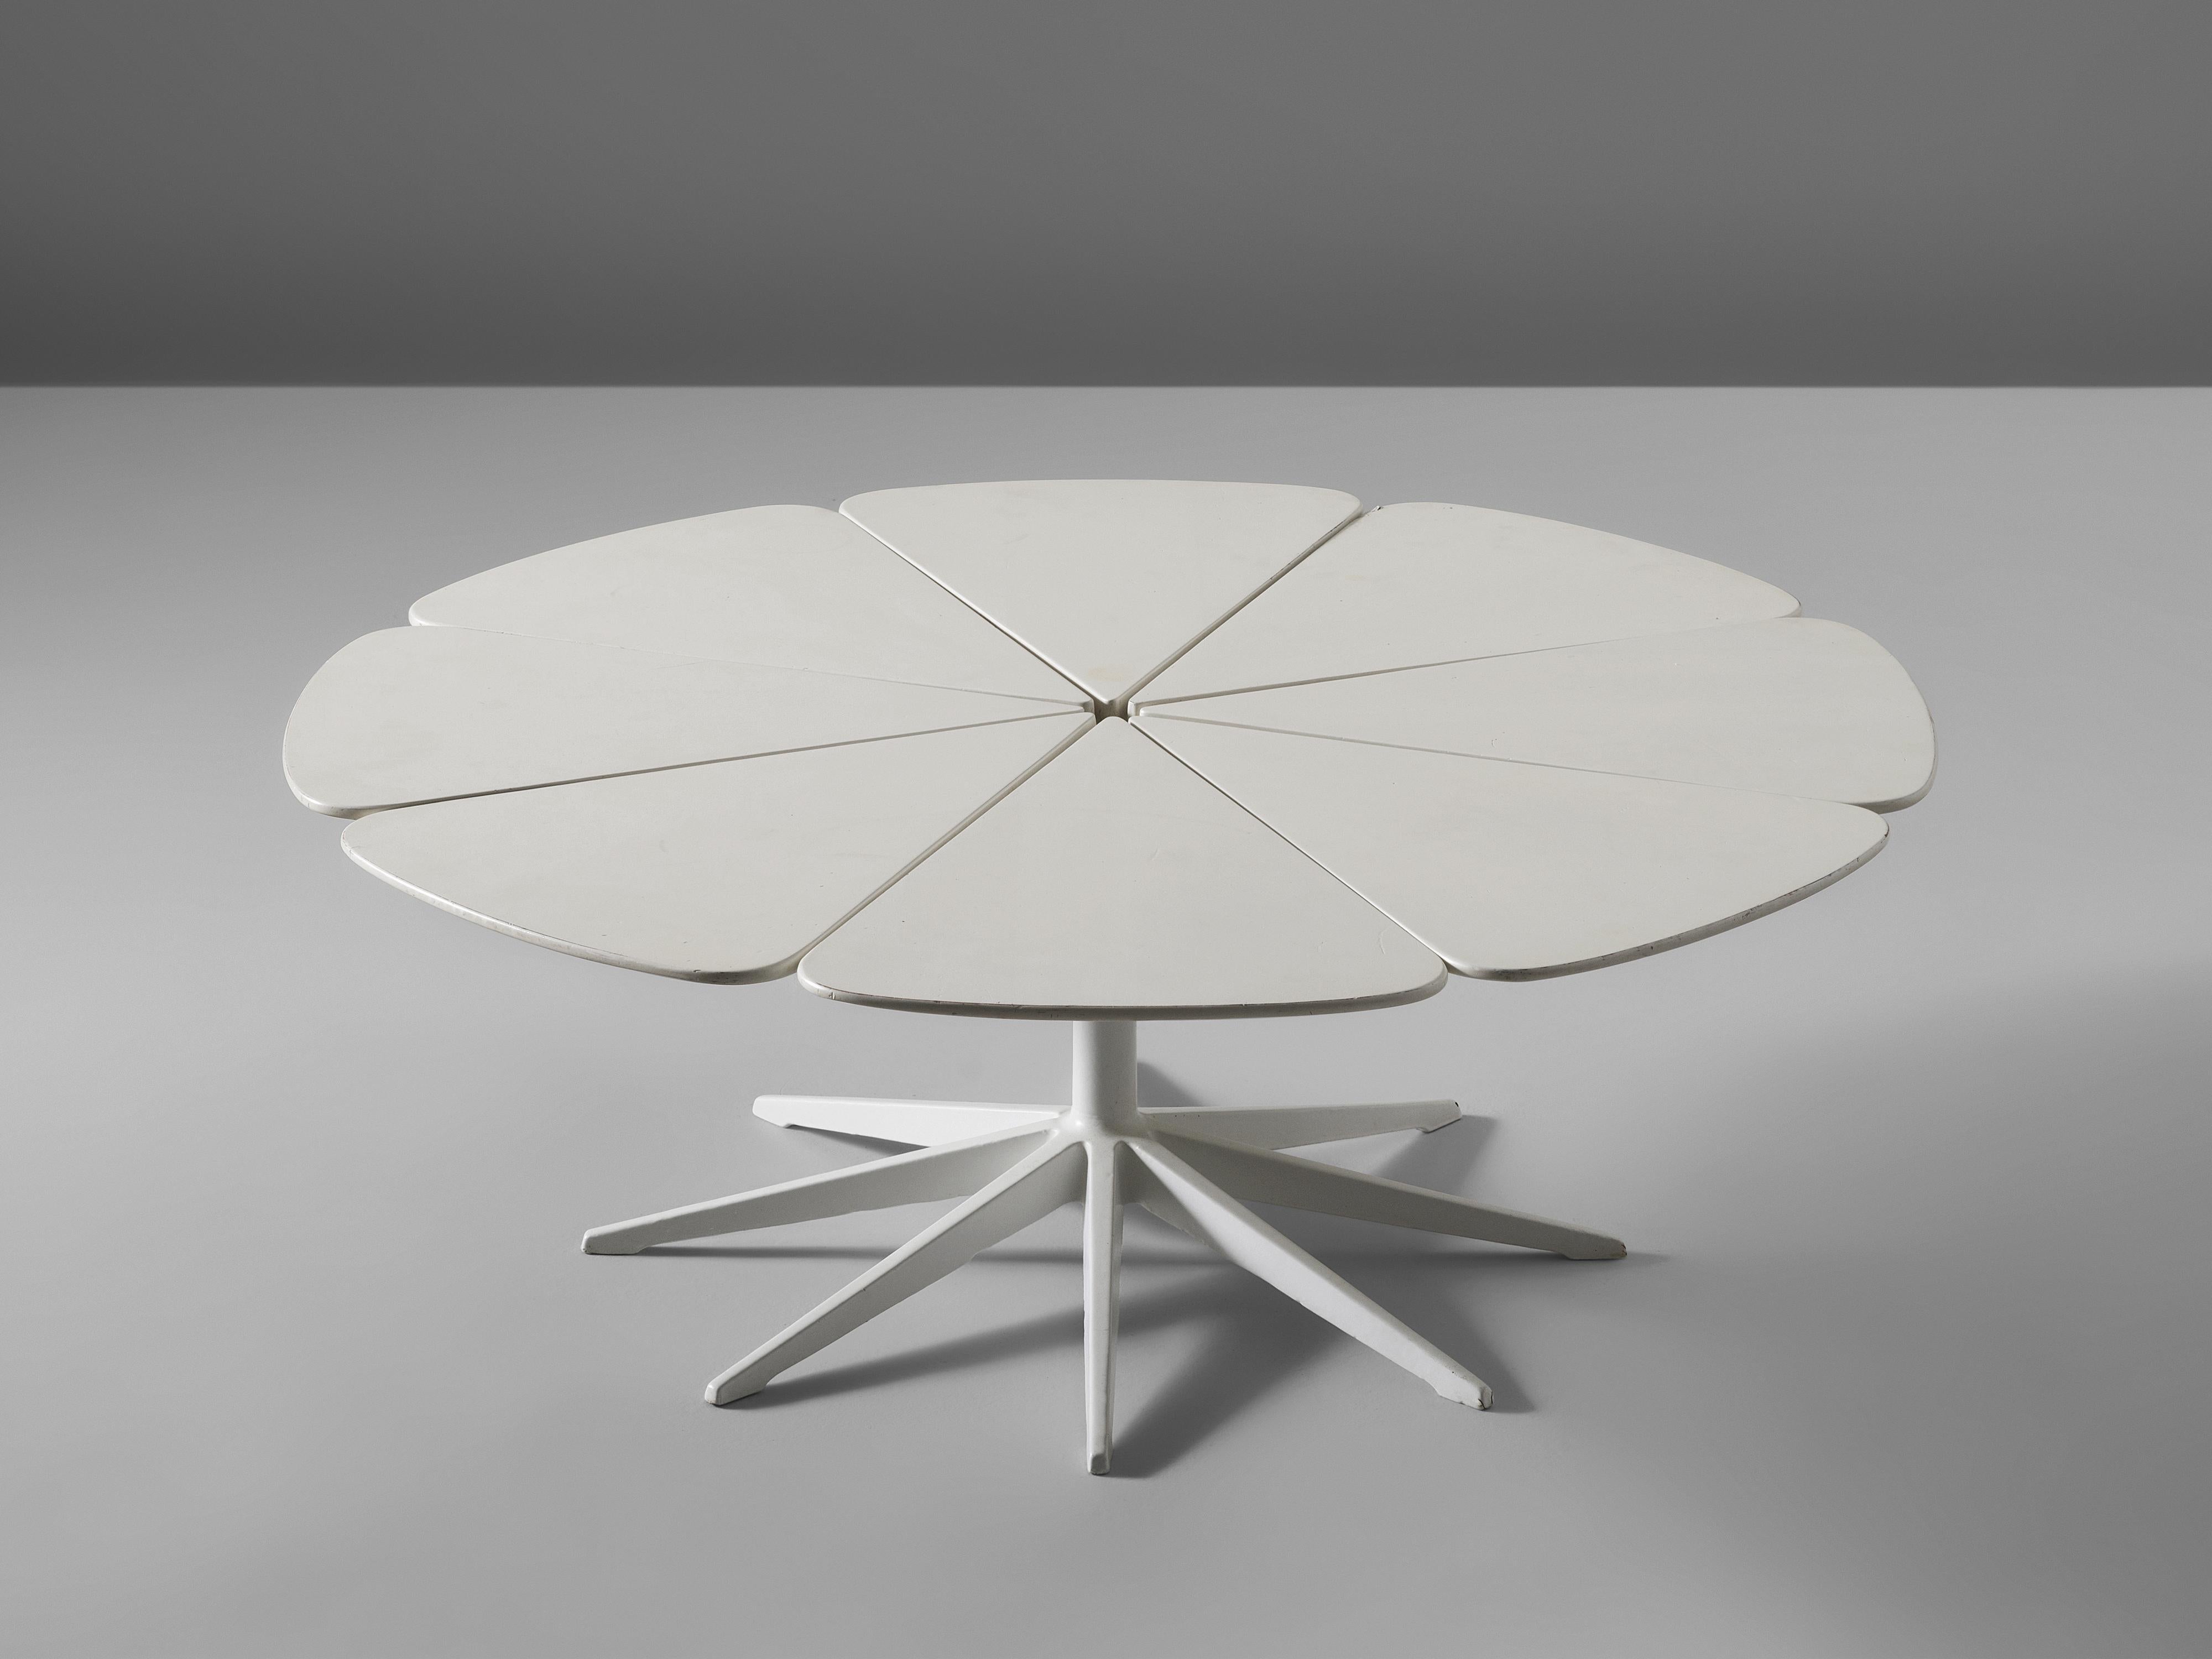 Richard Schultz for Knoll, 'petal' coffee table, aluminum, steel, polyurethane, United States, design 1960

This petal coffee or cocktail table is designed by Richard Schultz in 1960 for Knoll Furniture. This side table is part of a larger Petal